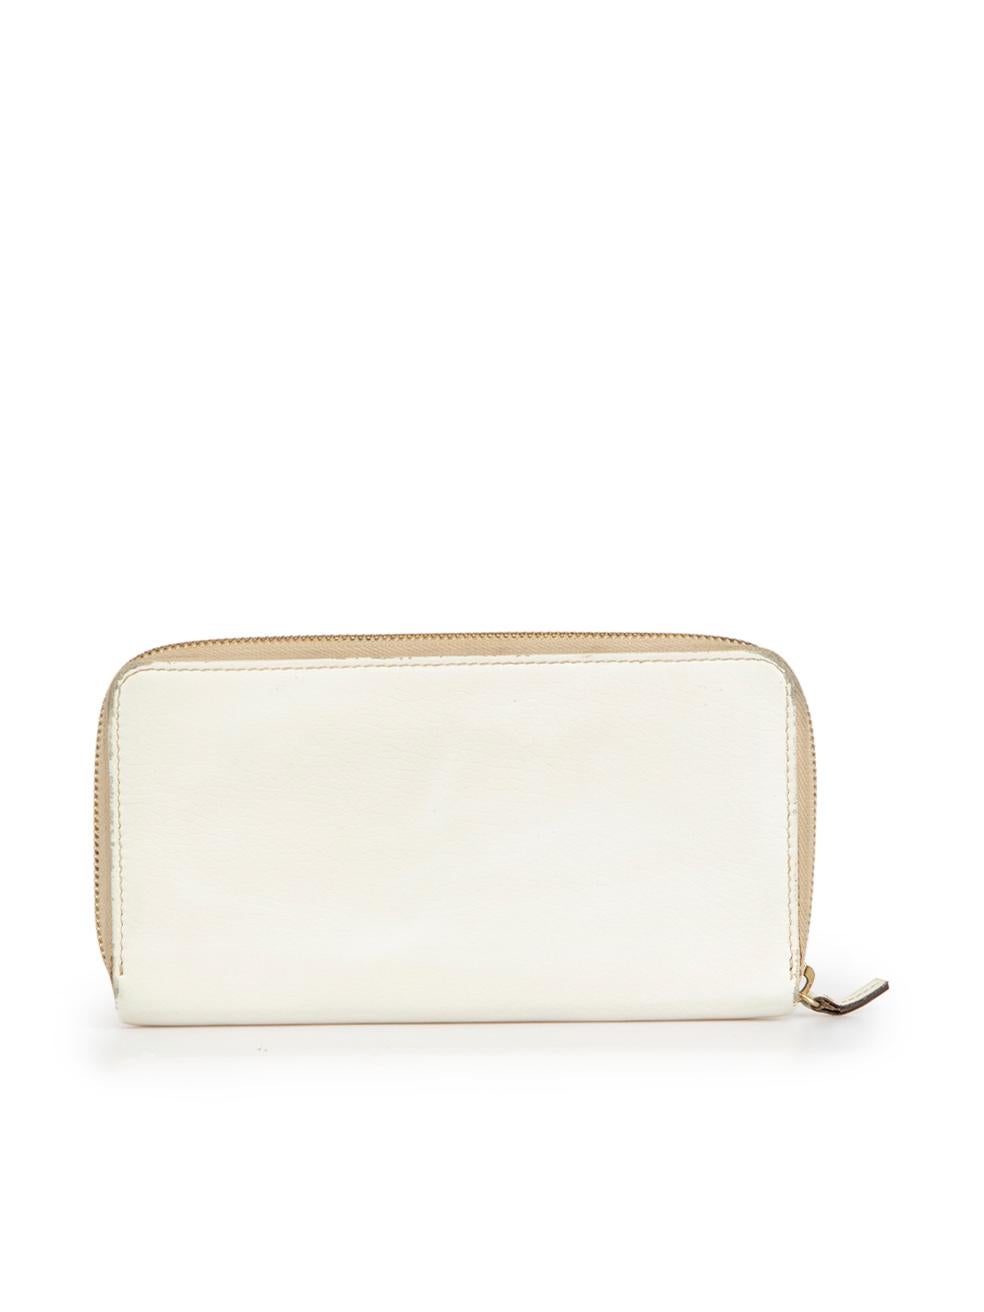 Jil Sander White Leather Wallet In Good Condition In London, GB